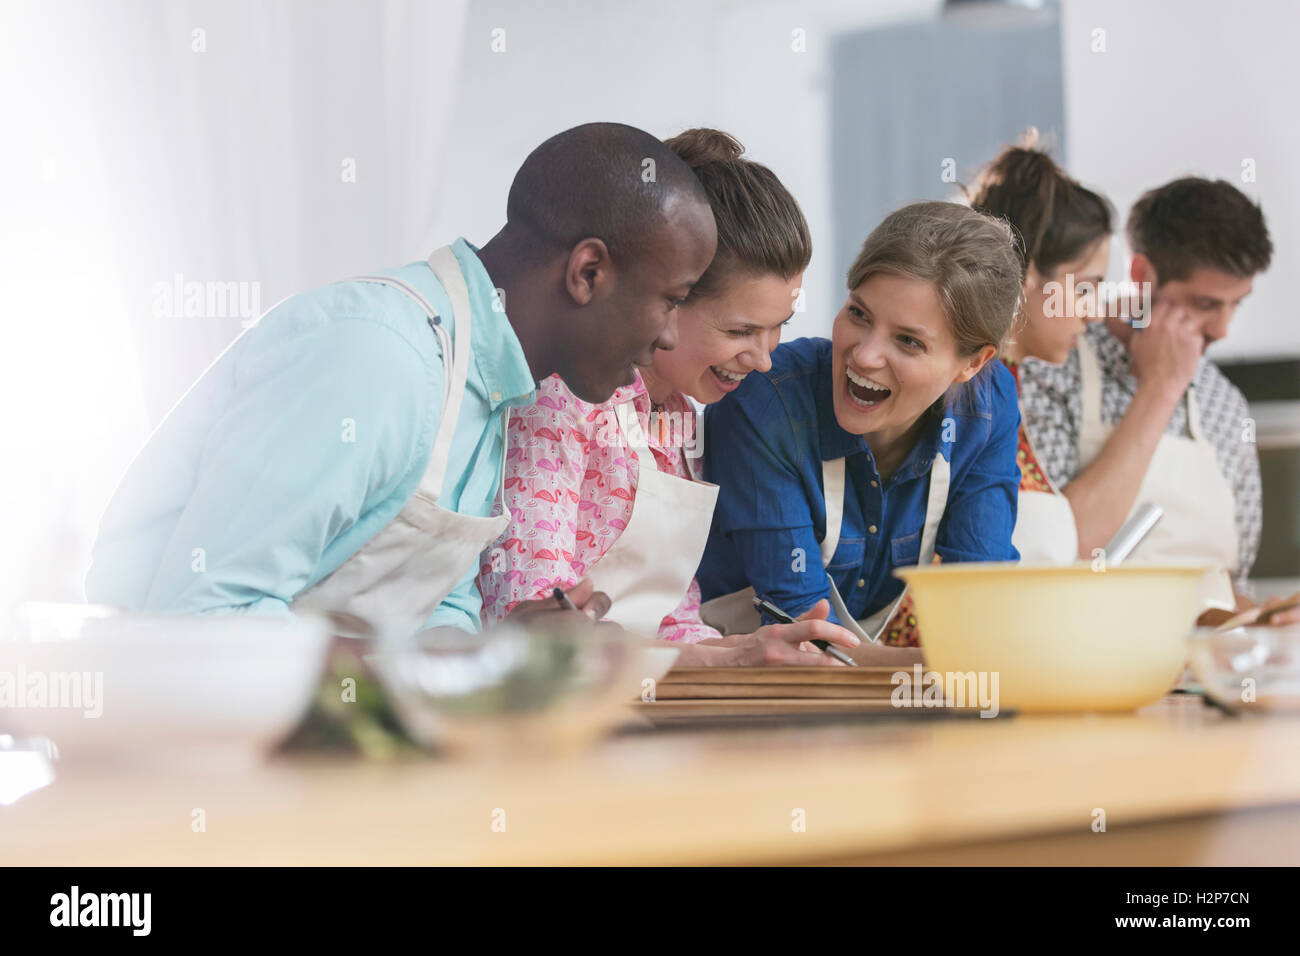 Laughing friends enjoying cooking class in kitchen Stock Photo